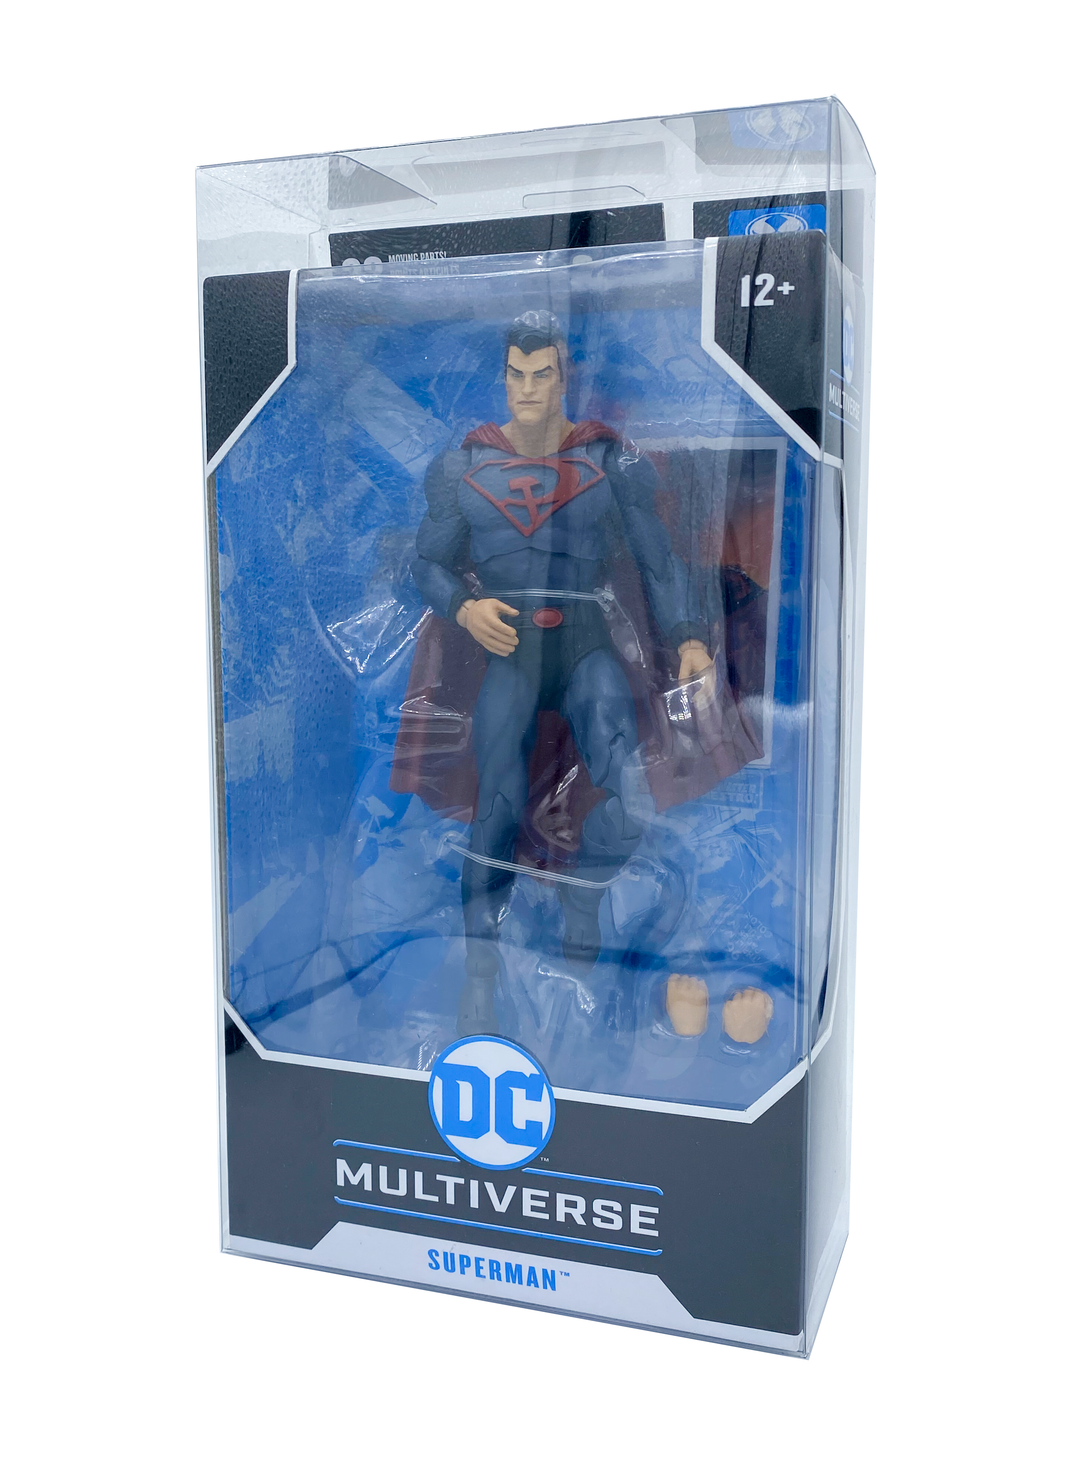 Case Protectors For McFarlane DC Multiverse 7" Carded Action Figures - Caseforceco